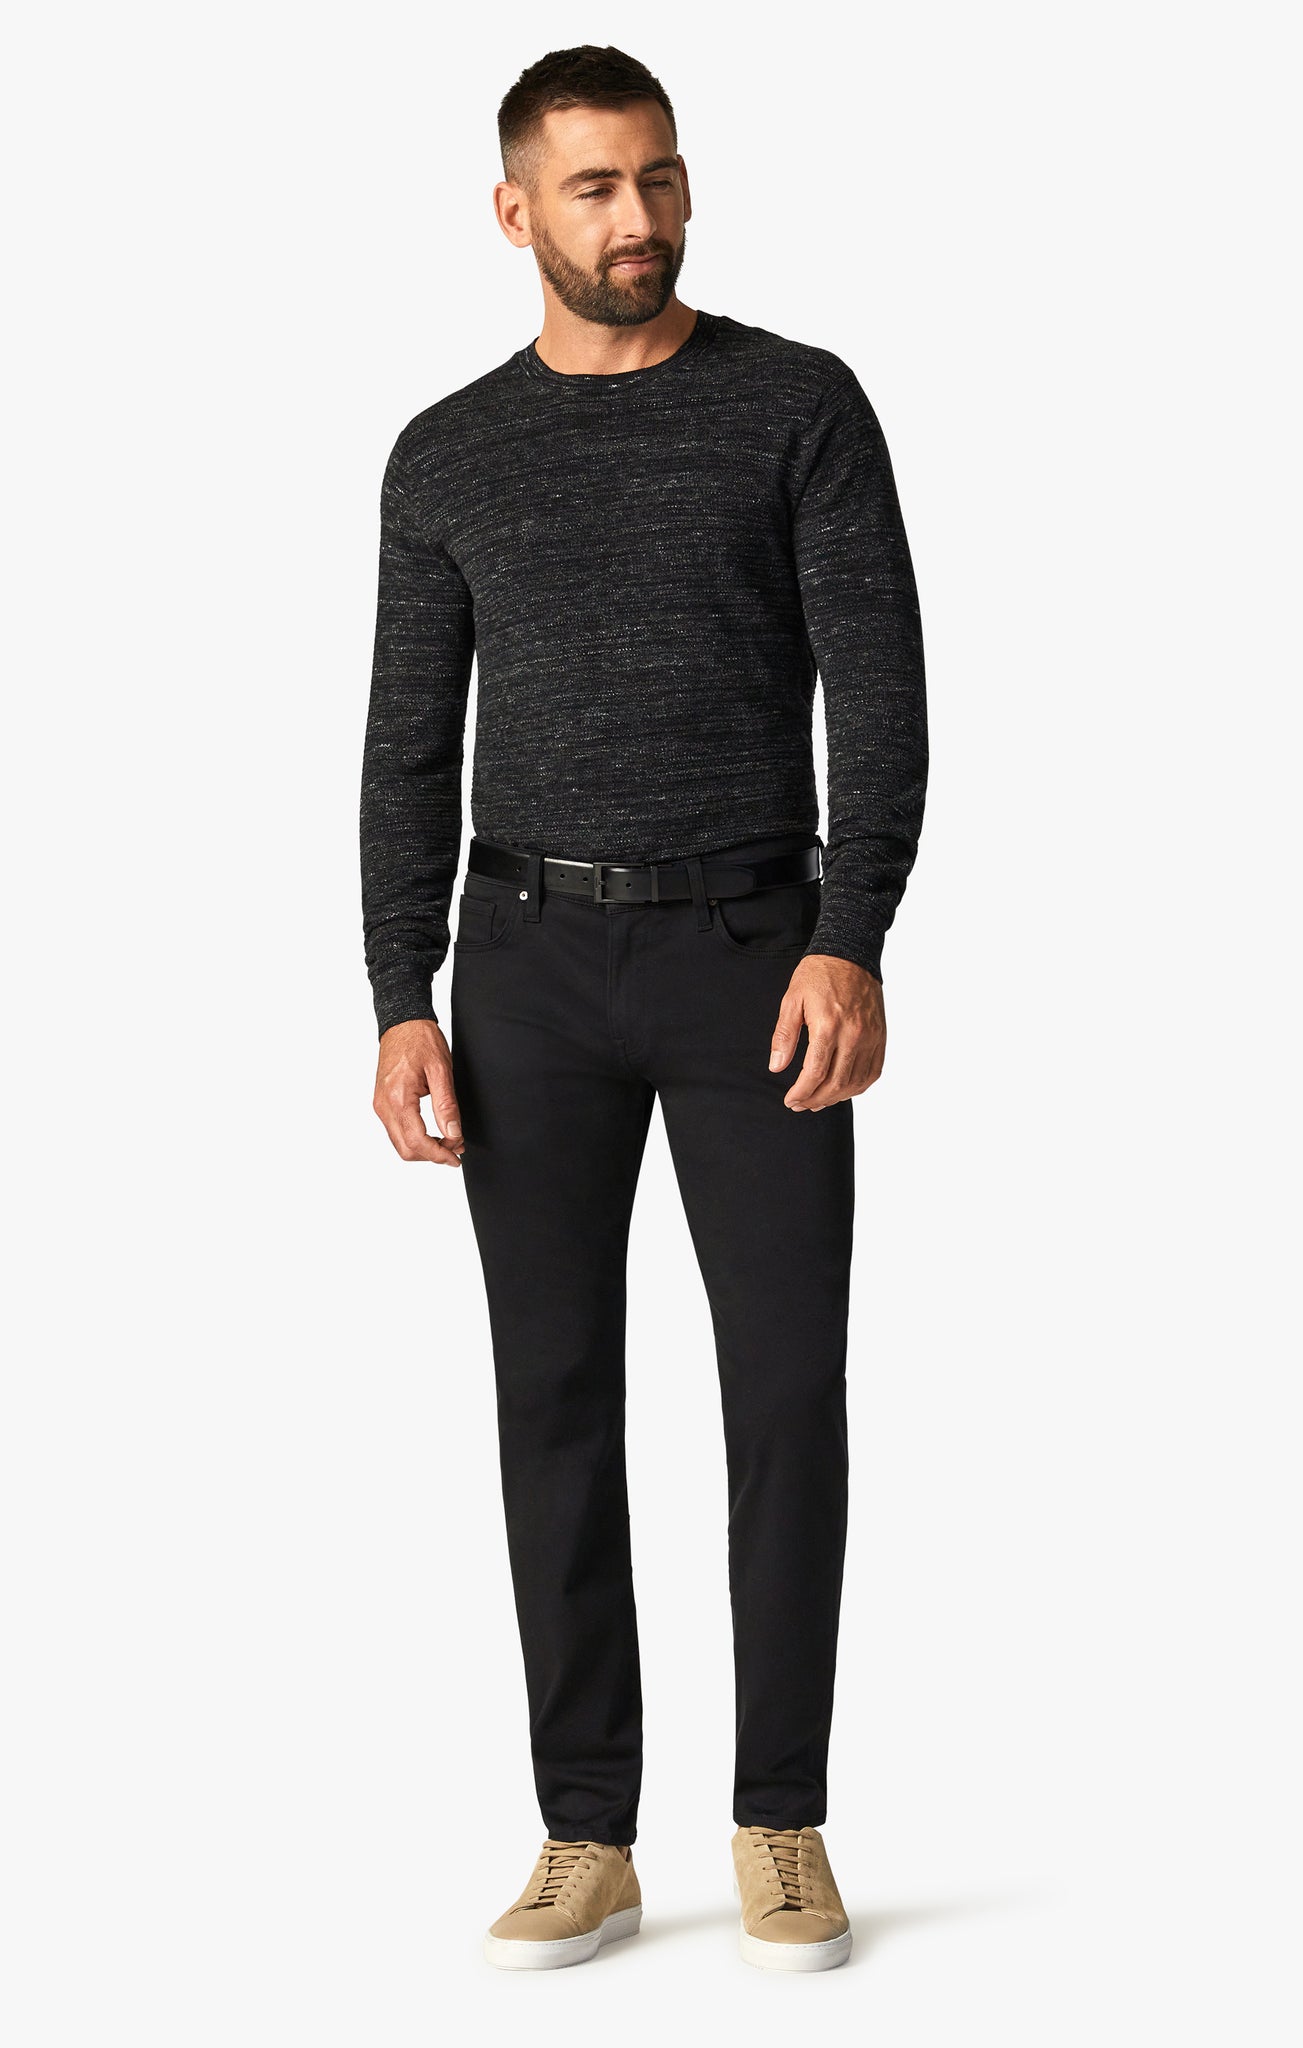 Cool Tapered Leg Pants in Select Double Black